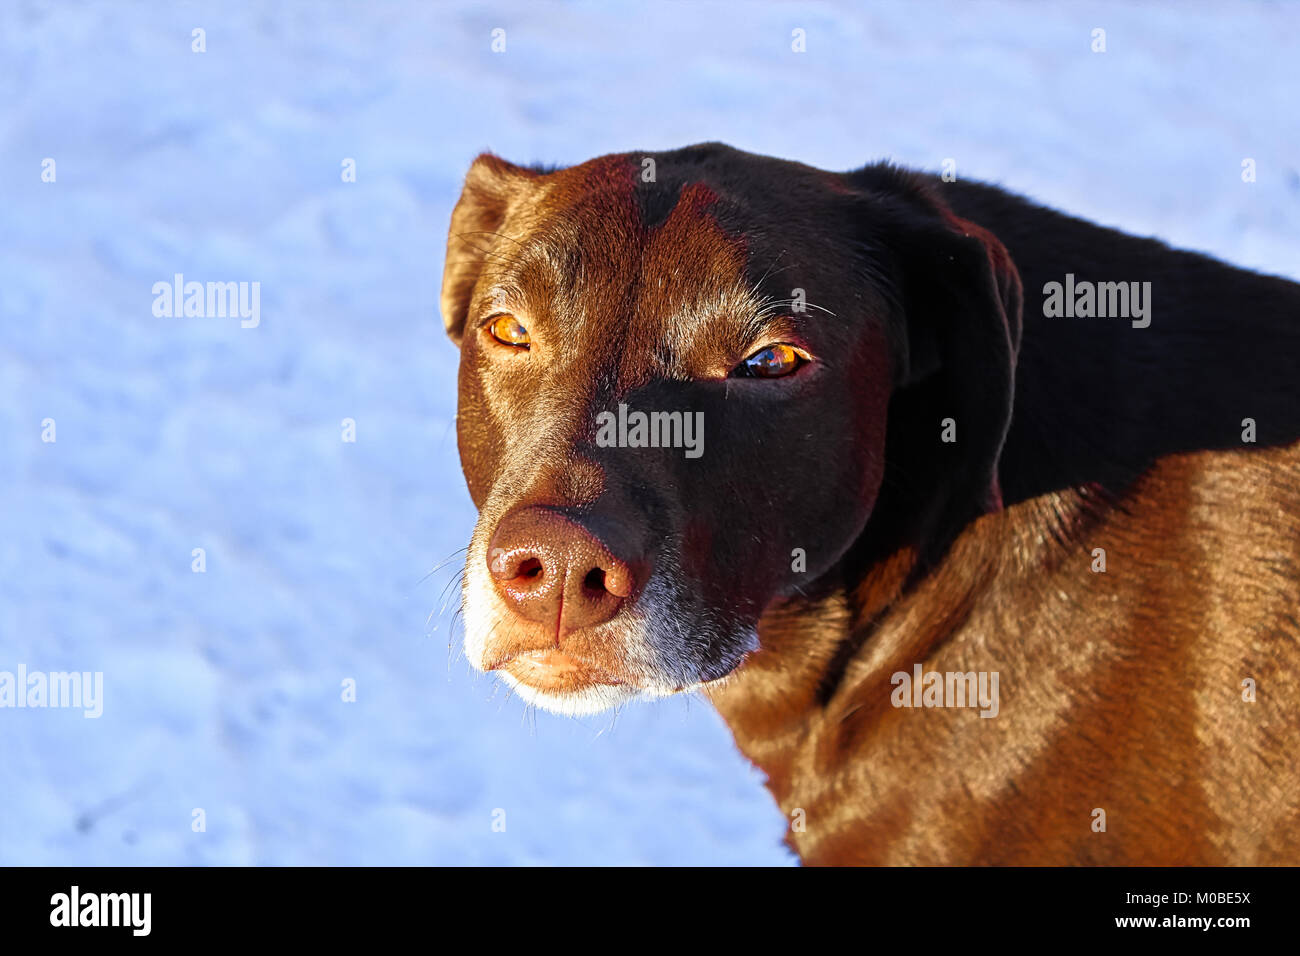 A very serious looking dog with a snow background Stock Photo